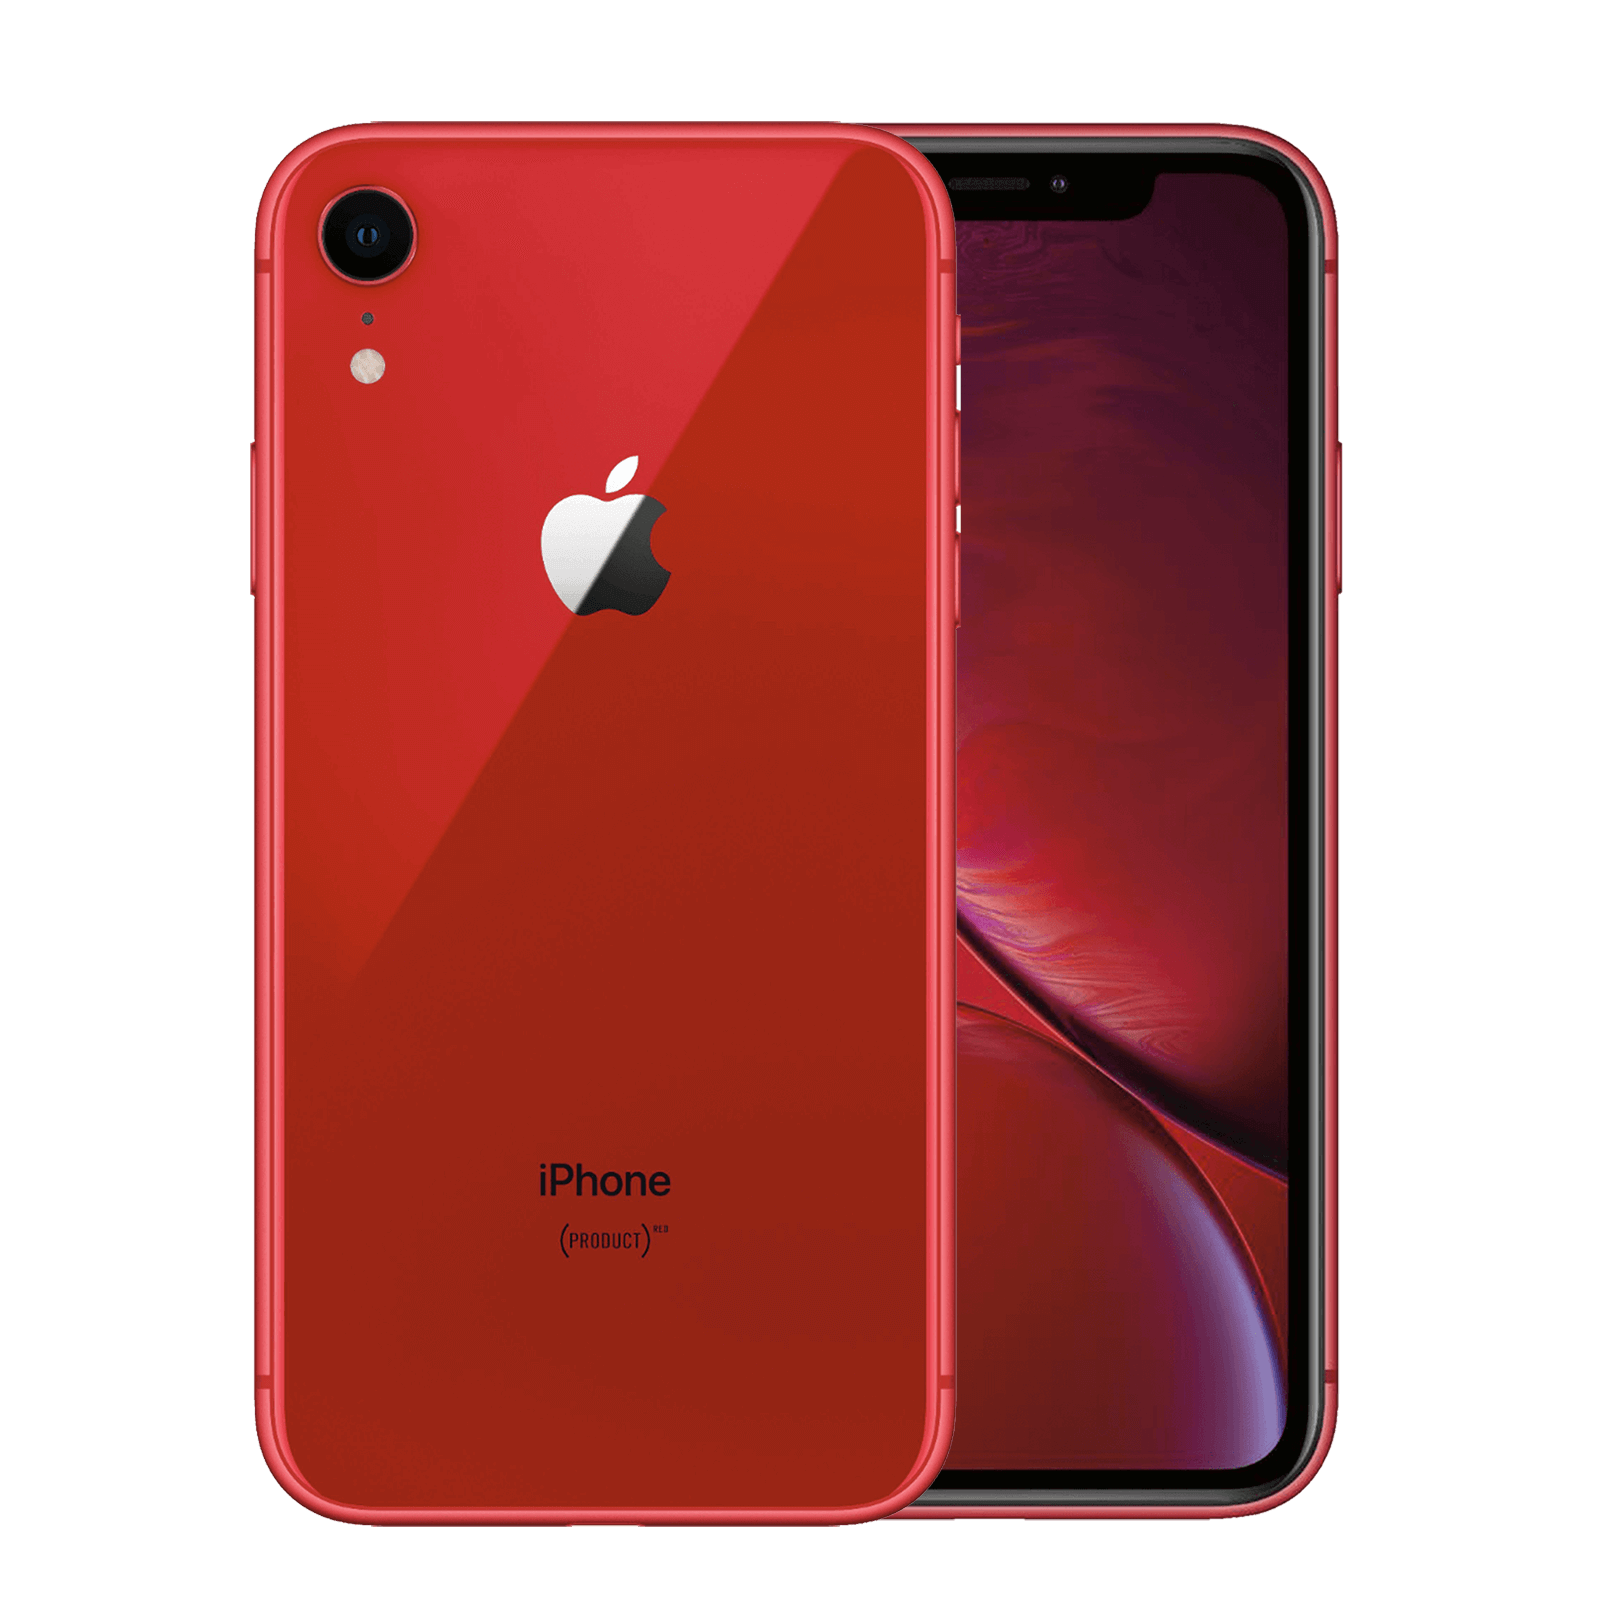 Apple iPhone XR 64GB Product Red Very Good - T-Mobile